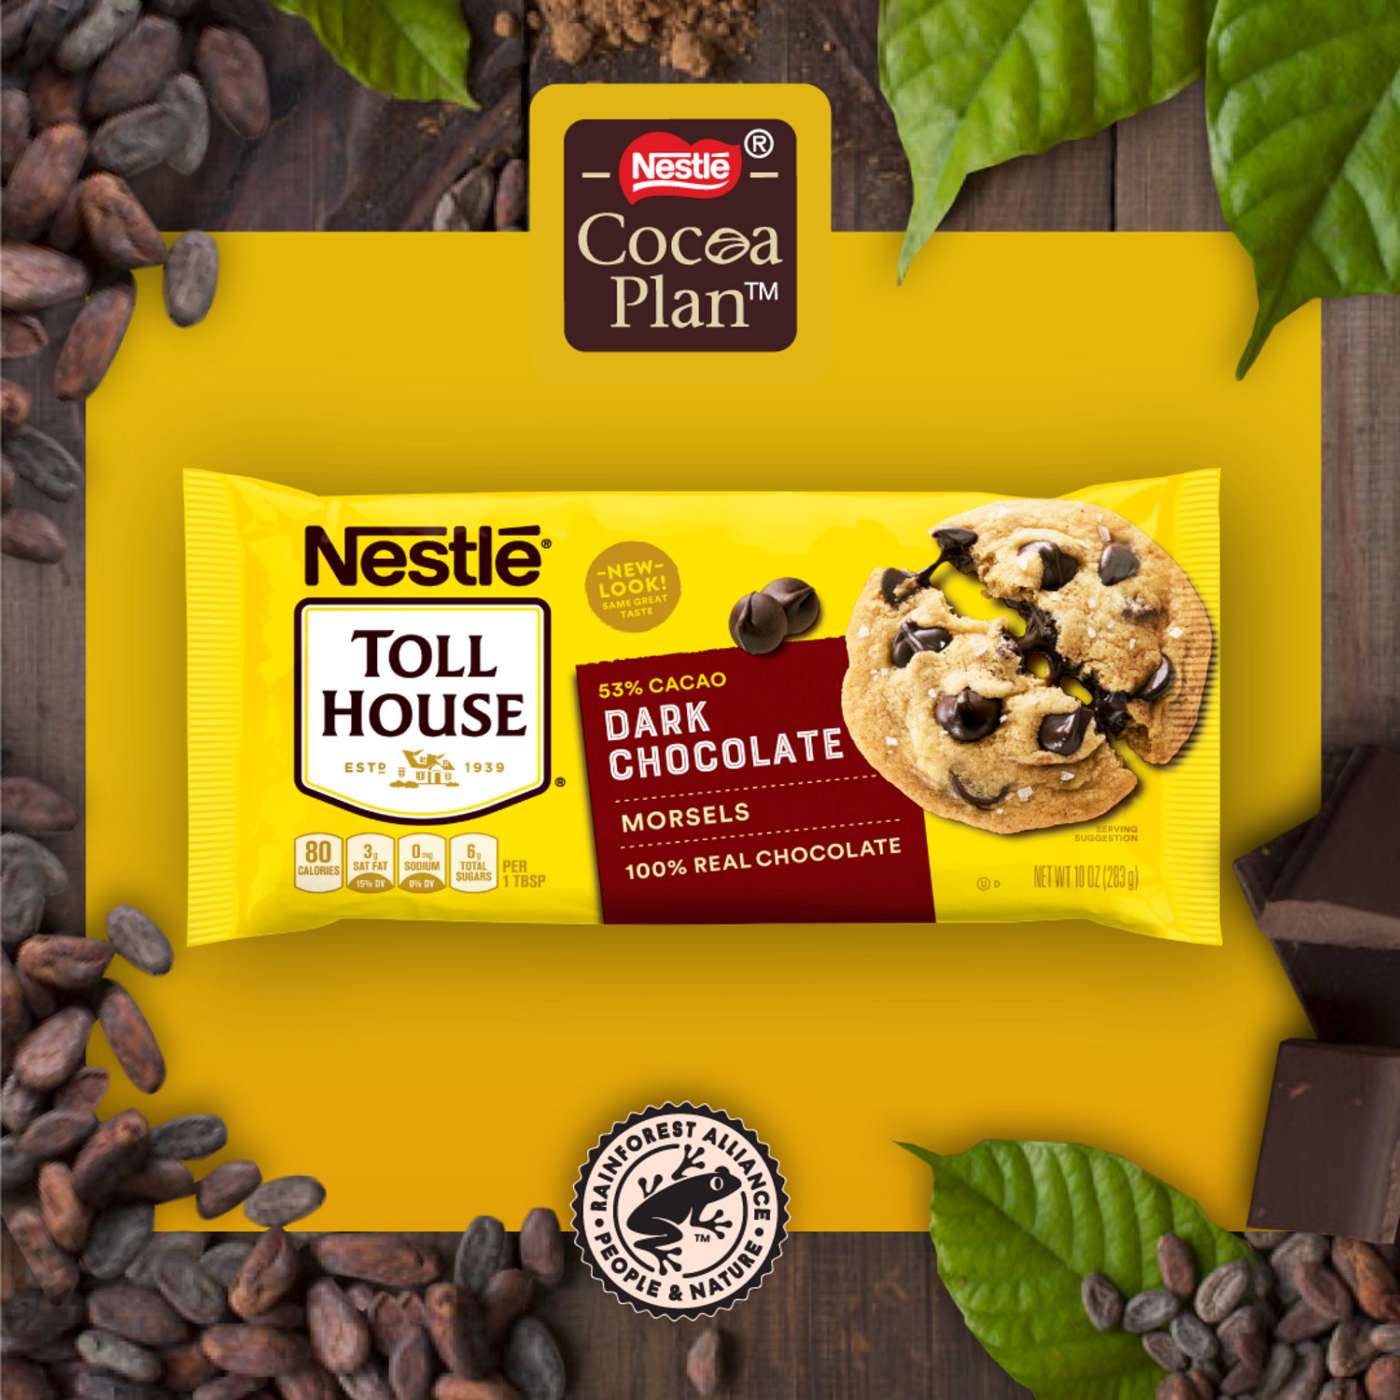 Nestle Toll House 53% Cacao Dark Chocolate Chips; image 5 of 5